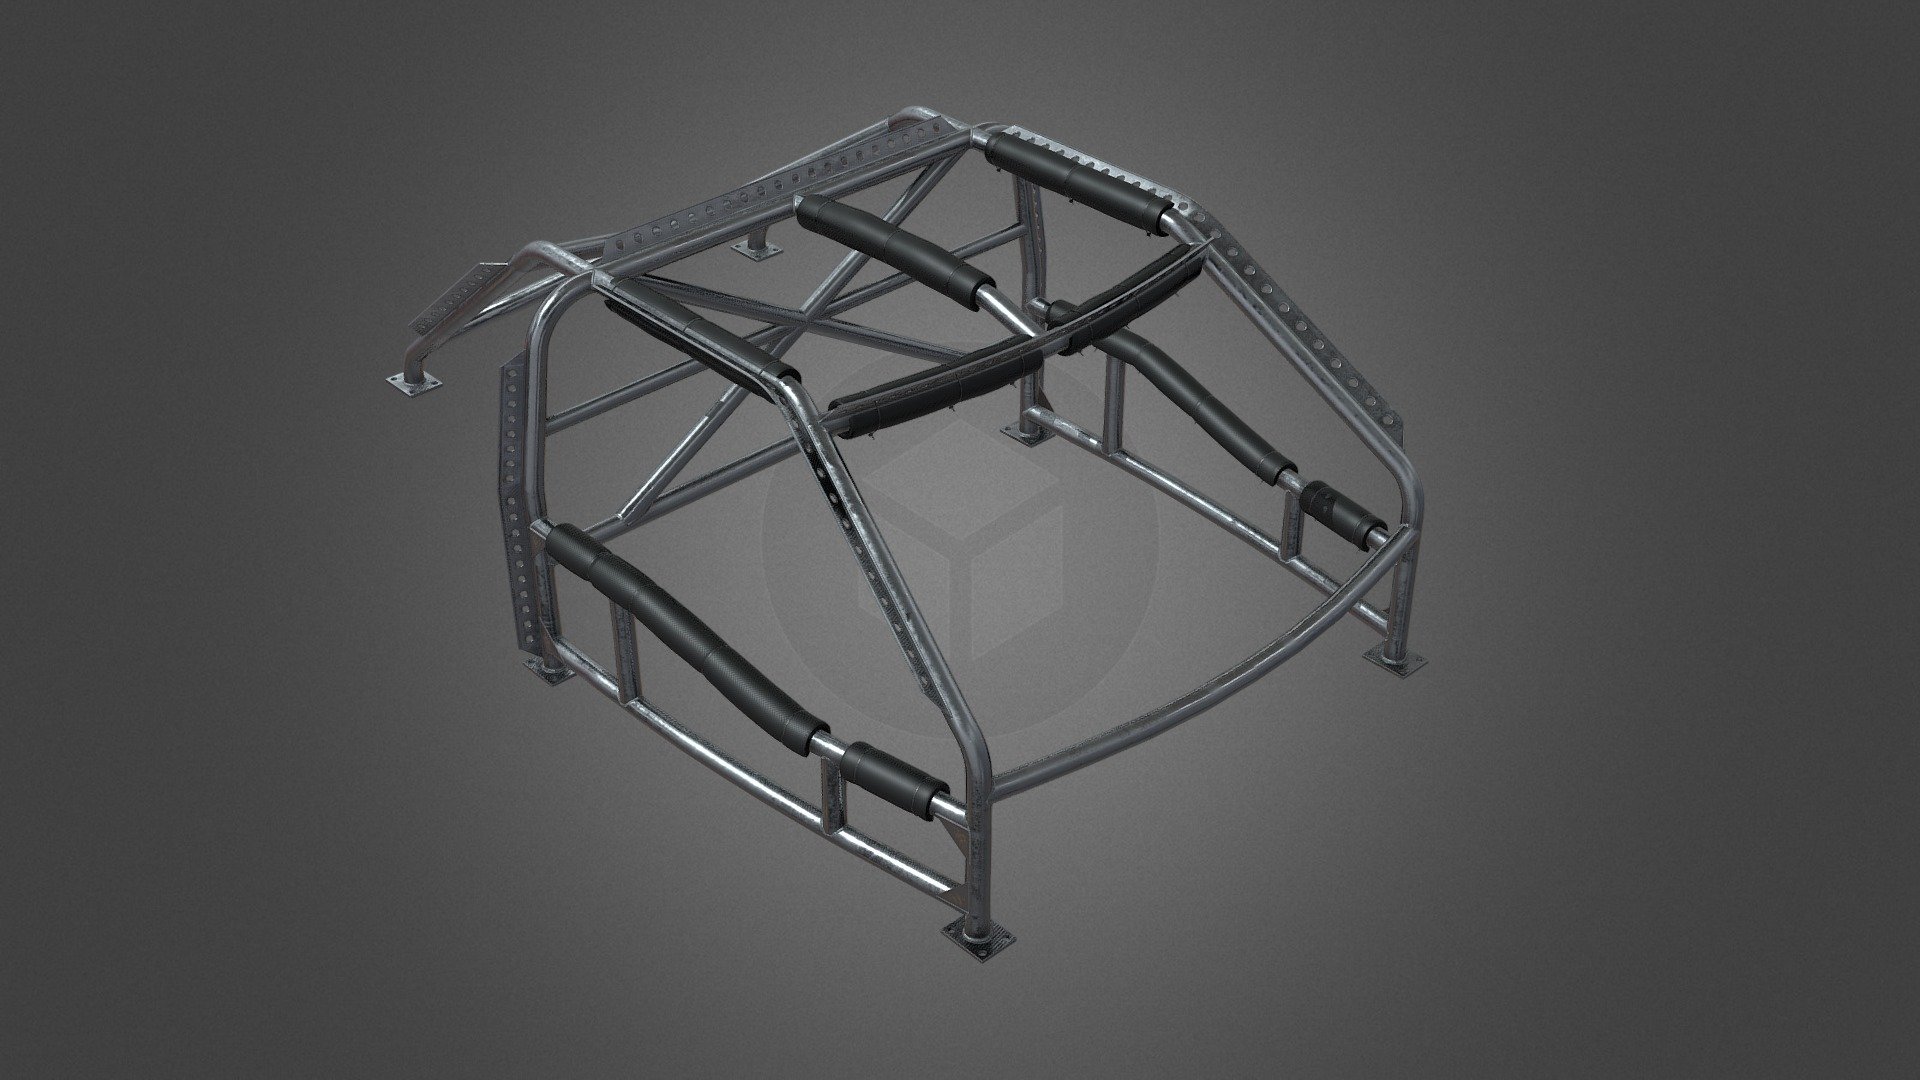 Heavy Duty Roll Cage for kitbashing. Suitable for race cars, street cars or whatever you like! Not based on any real life roll cage; it may take some adjustments to fit your model. 

Personal project. Please visit my Artstation account for full project breakdown.

@pjscottartist 

Thank you for looking 3d model